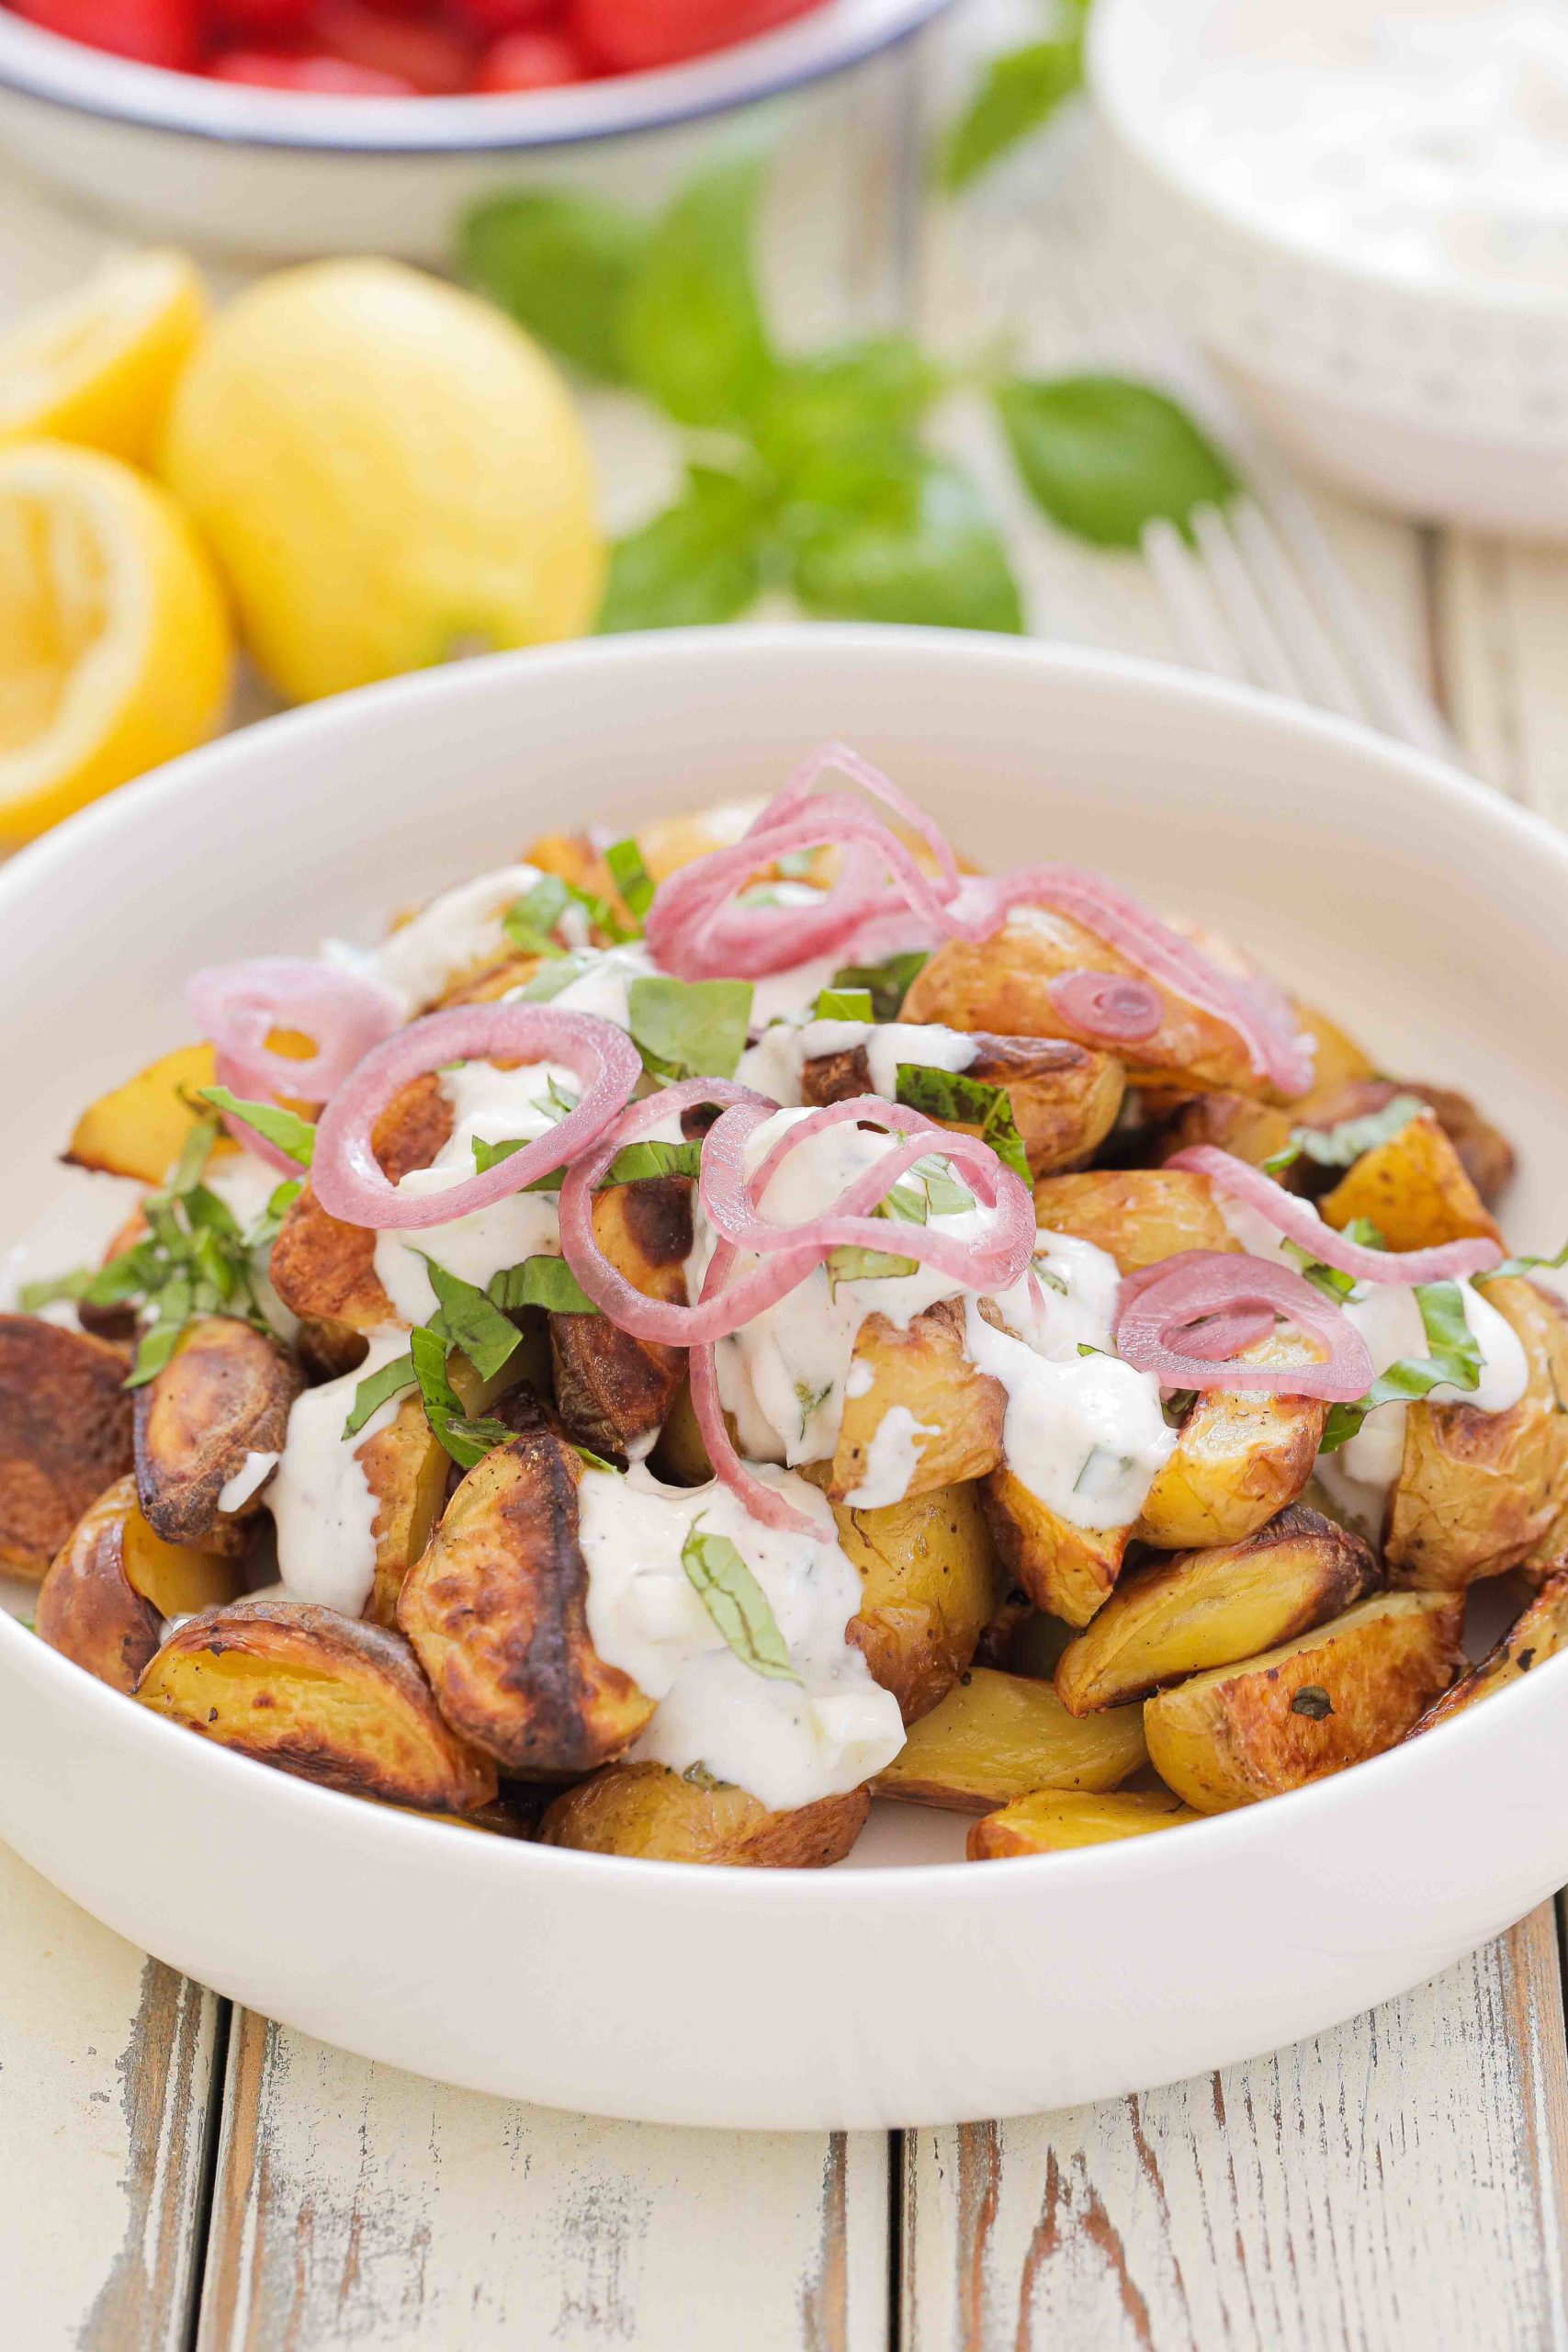 Perfect for your al fresco feast this roasted new potato salad is a full step up from a traditional potato salad. The potatoes are roasted with lemon and herbs and served with vegan tzatziki and quick pickled onions. Recipe on thecookandhim.com #roastednewpotatosalad #pickledredonion #tzatziki #summersalad #alfrescofood #picnicfood #bbqsides #summerlunchideas #vegansalad #potatosalad